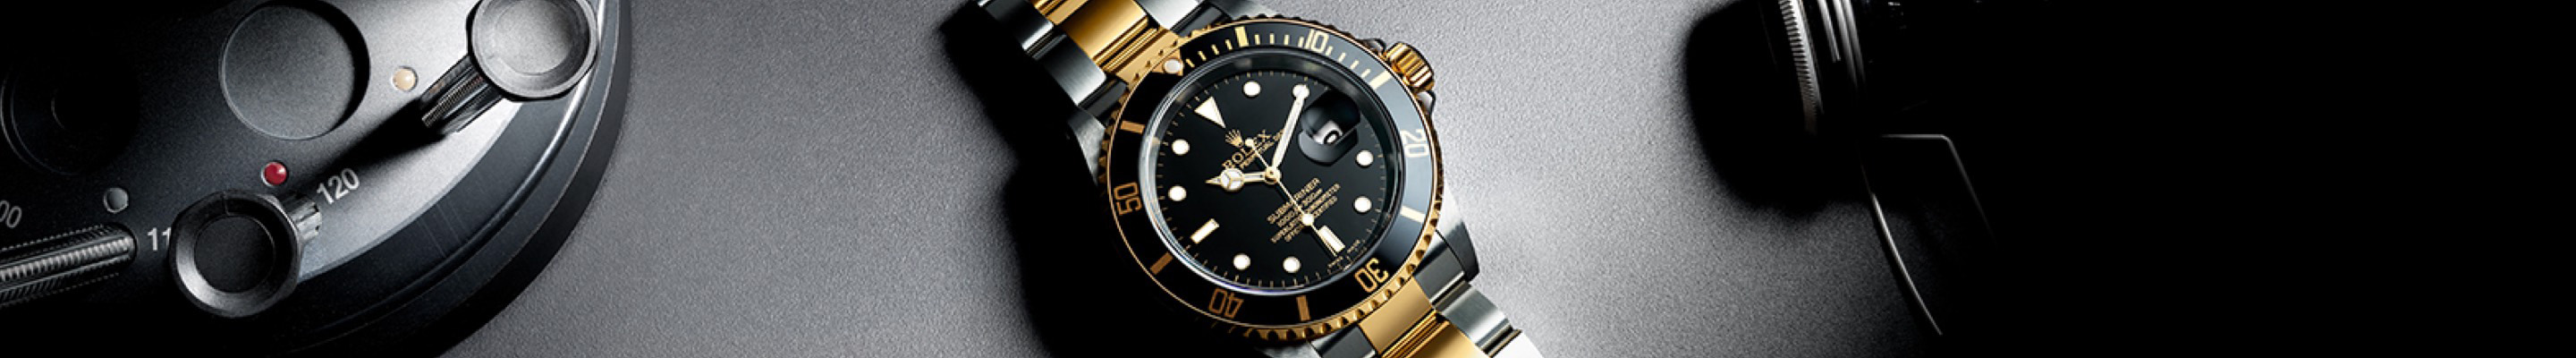 Rolex Gold and Black colored watch